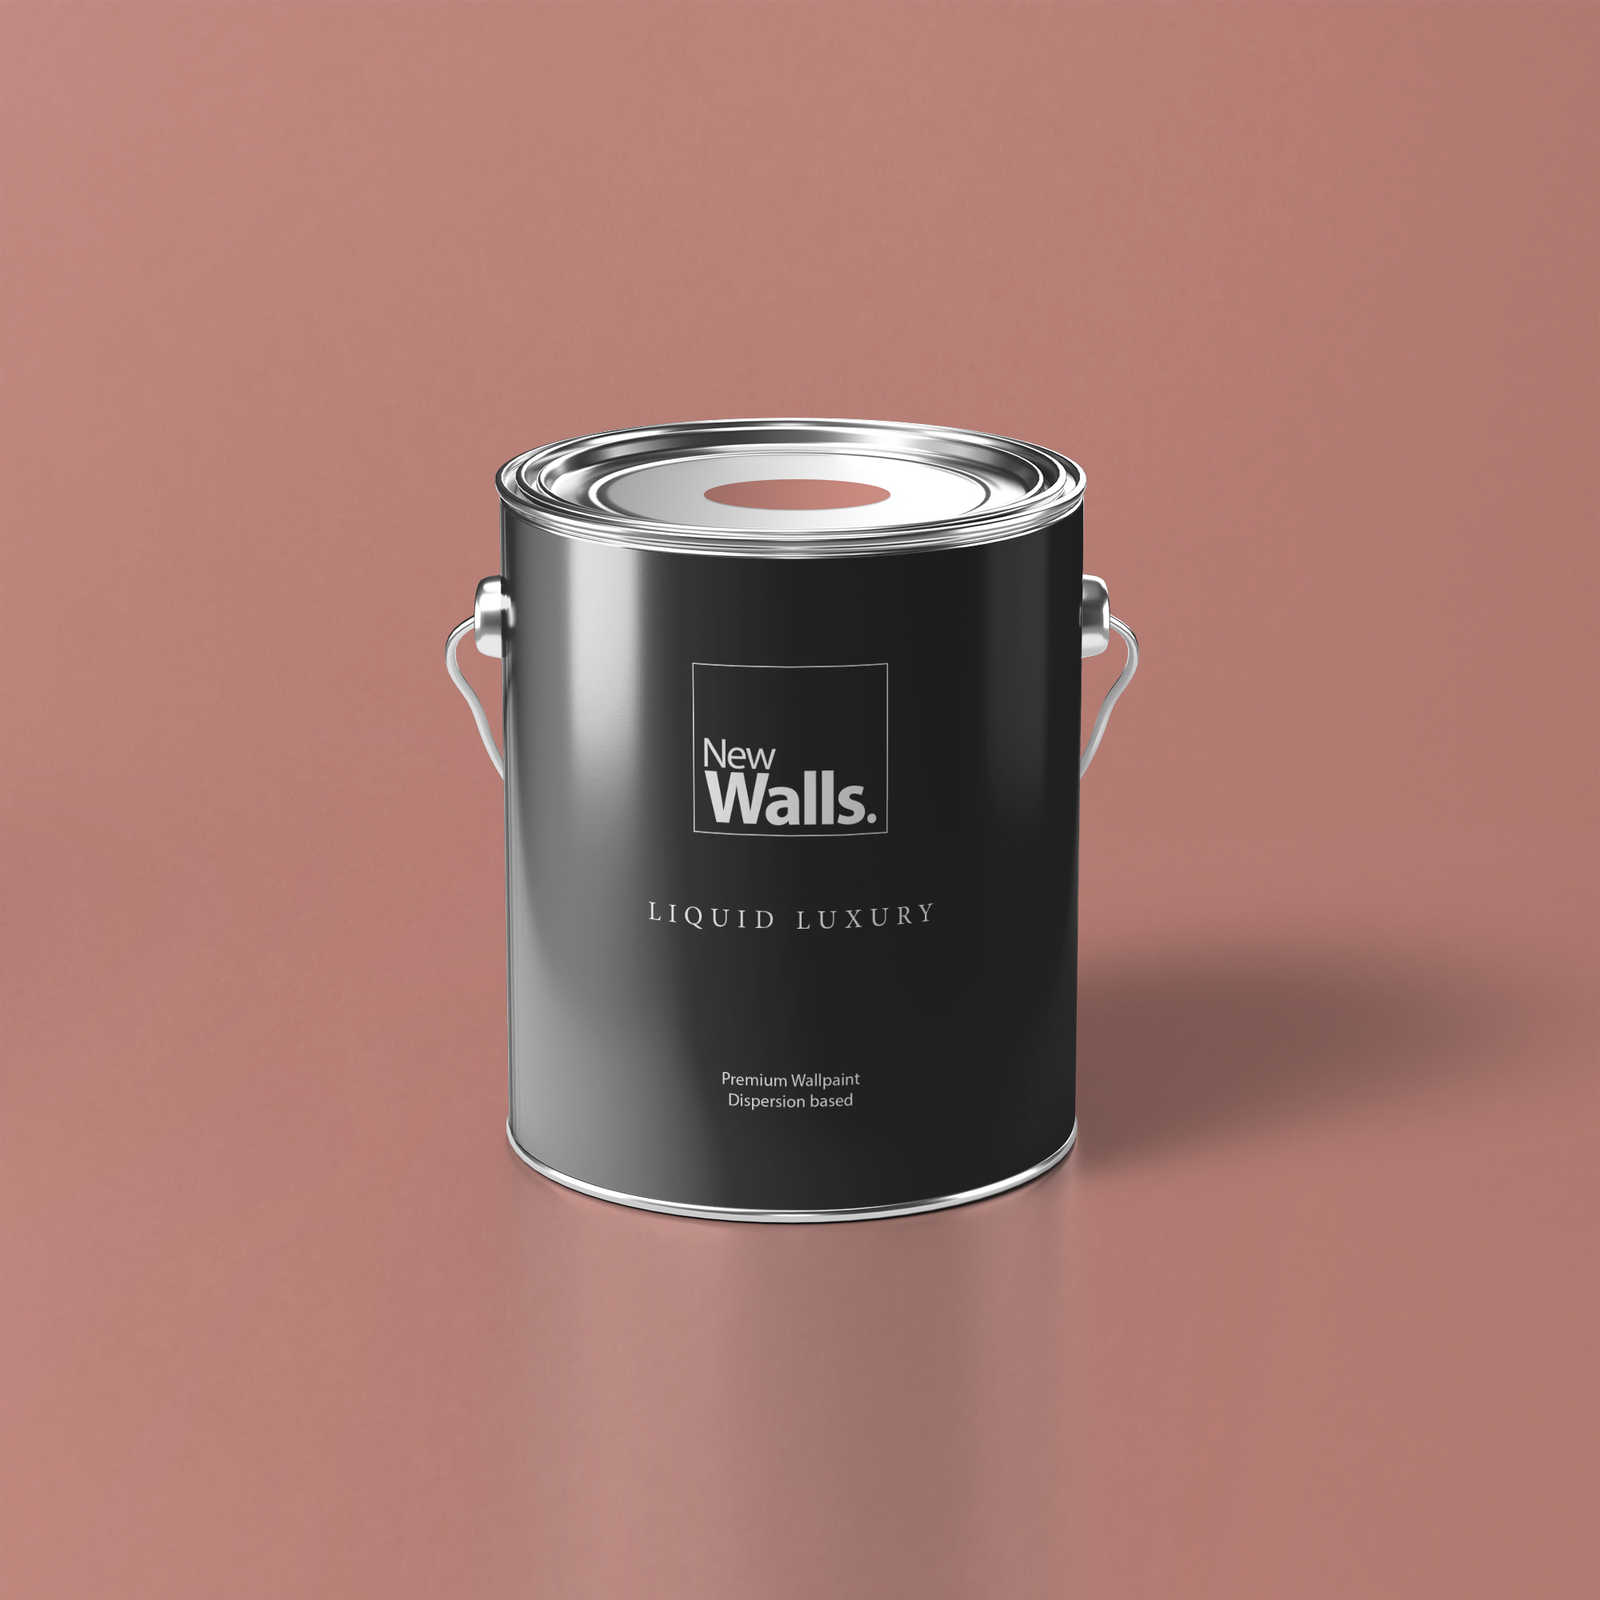 Premium Wall Paint Relaxing Salmon »Luxury Lipstick« NW1004 – 5 litre
